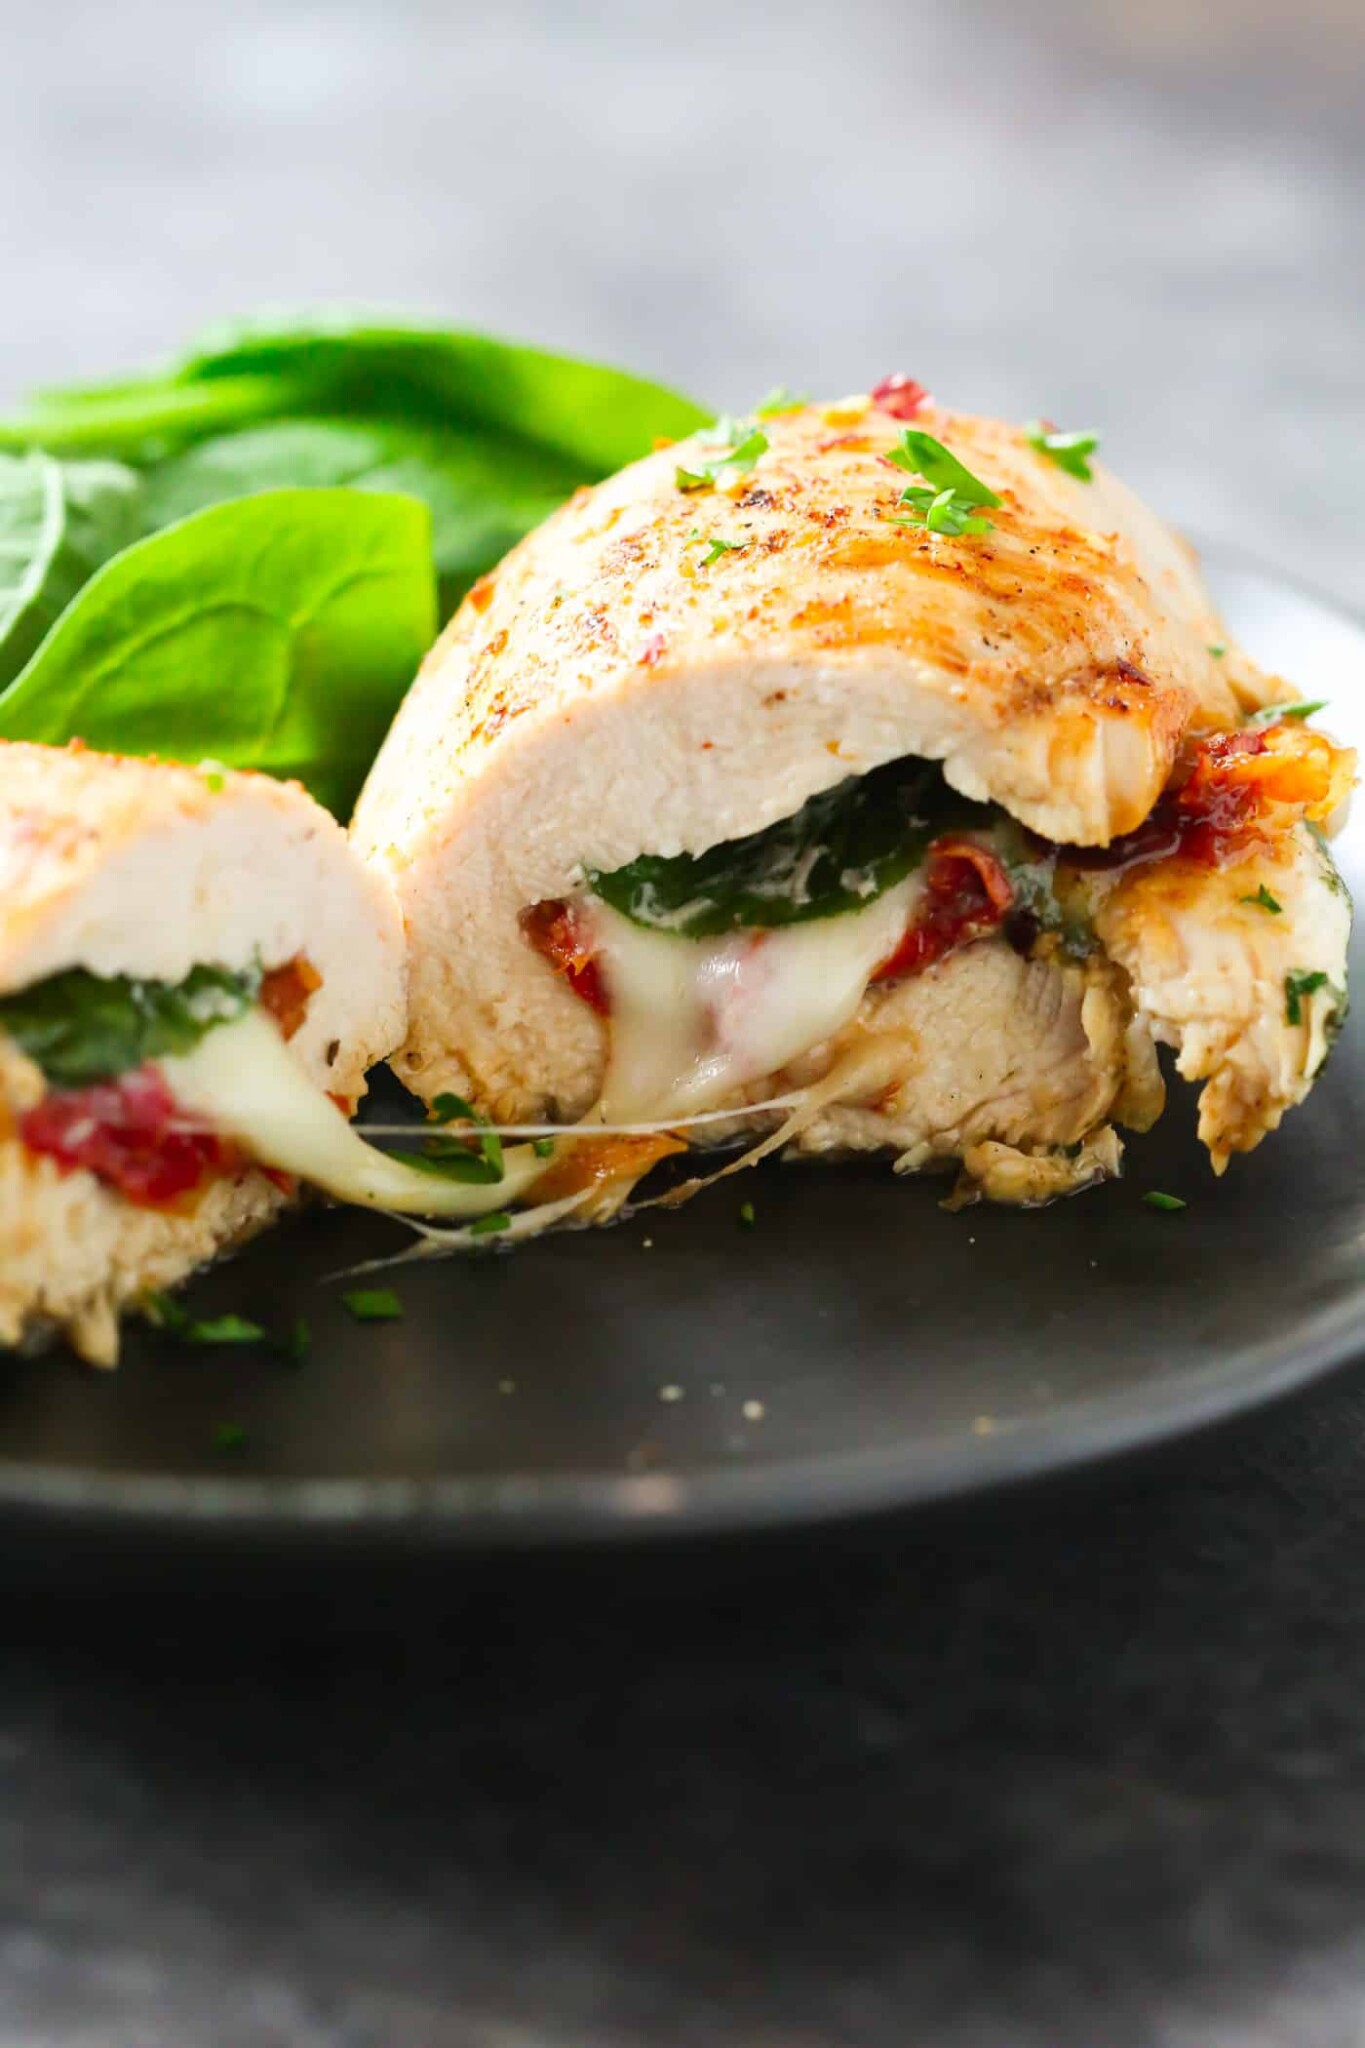 Spinach stuffed chicken breast cut in half on a plate.